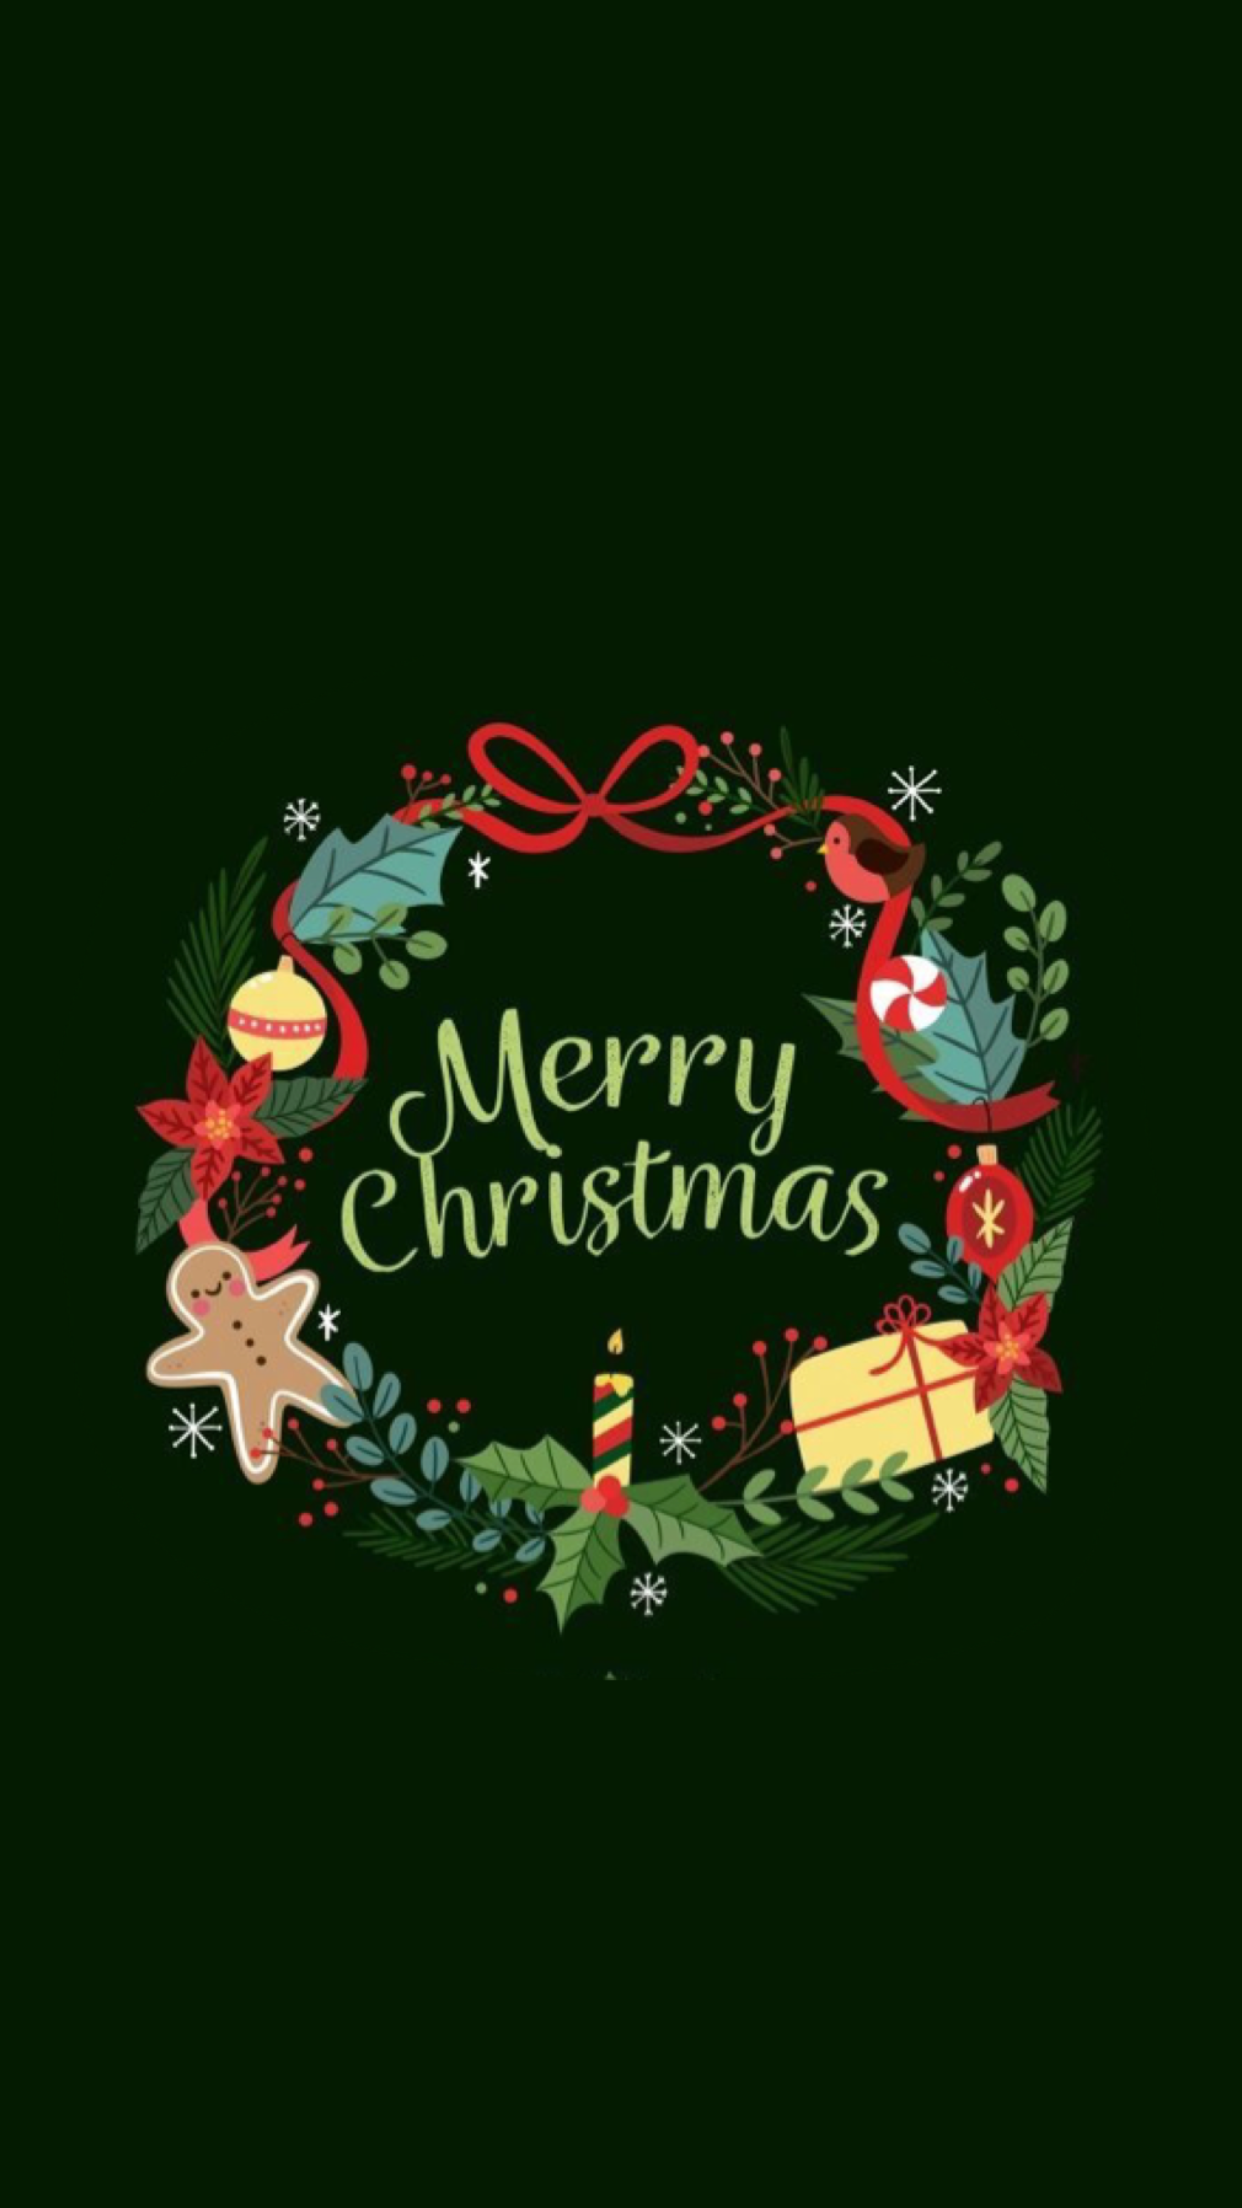 Merry Christmas Mobile Wallpapers - Wallpaper Cave